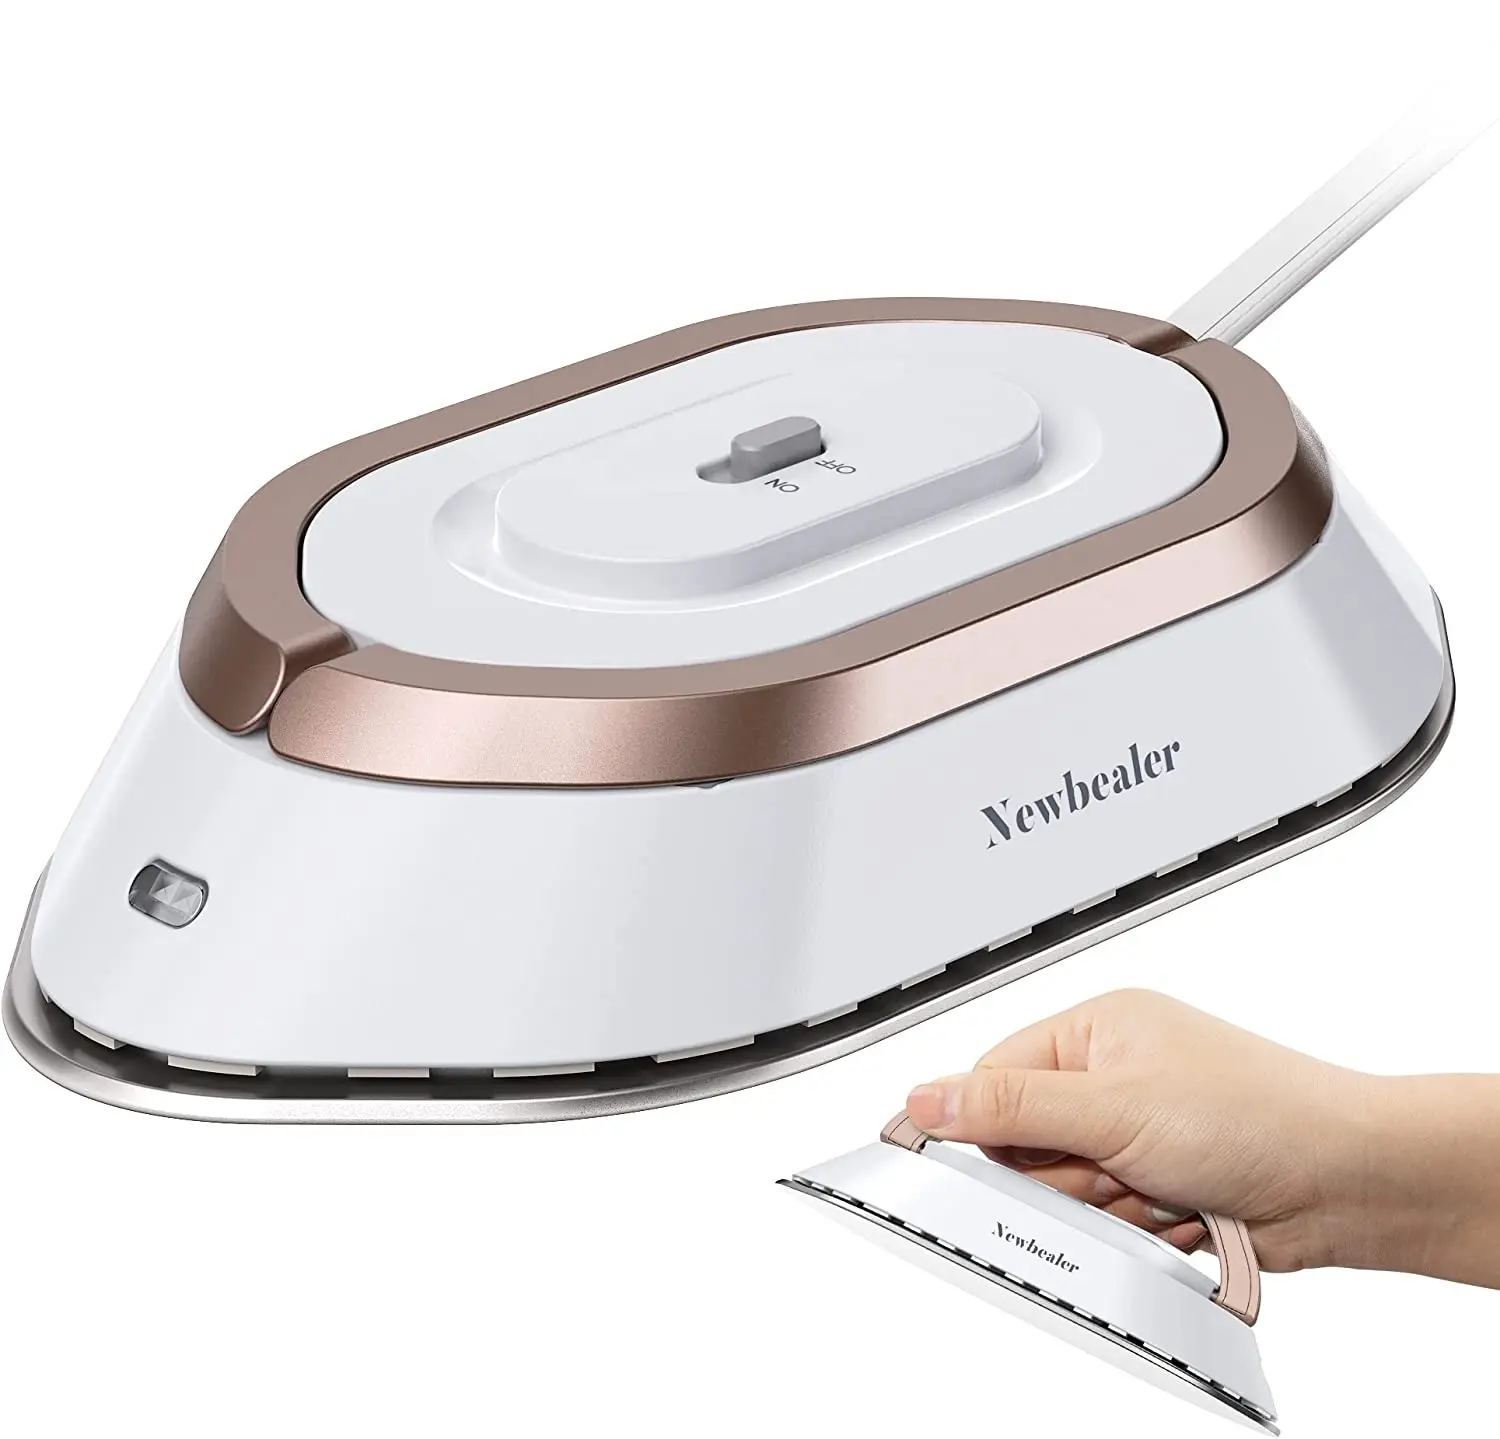 Mini Travel Iron with Dual Voltage - 120V/220V Lightweight Dry Iron for Clothes Portable Iron for Travel